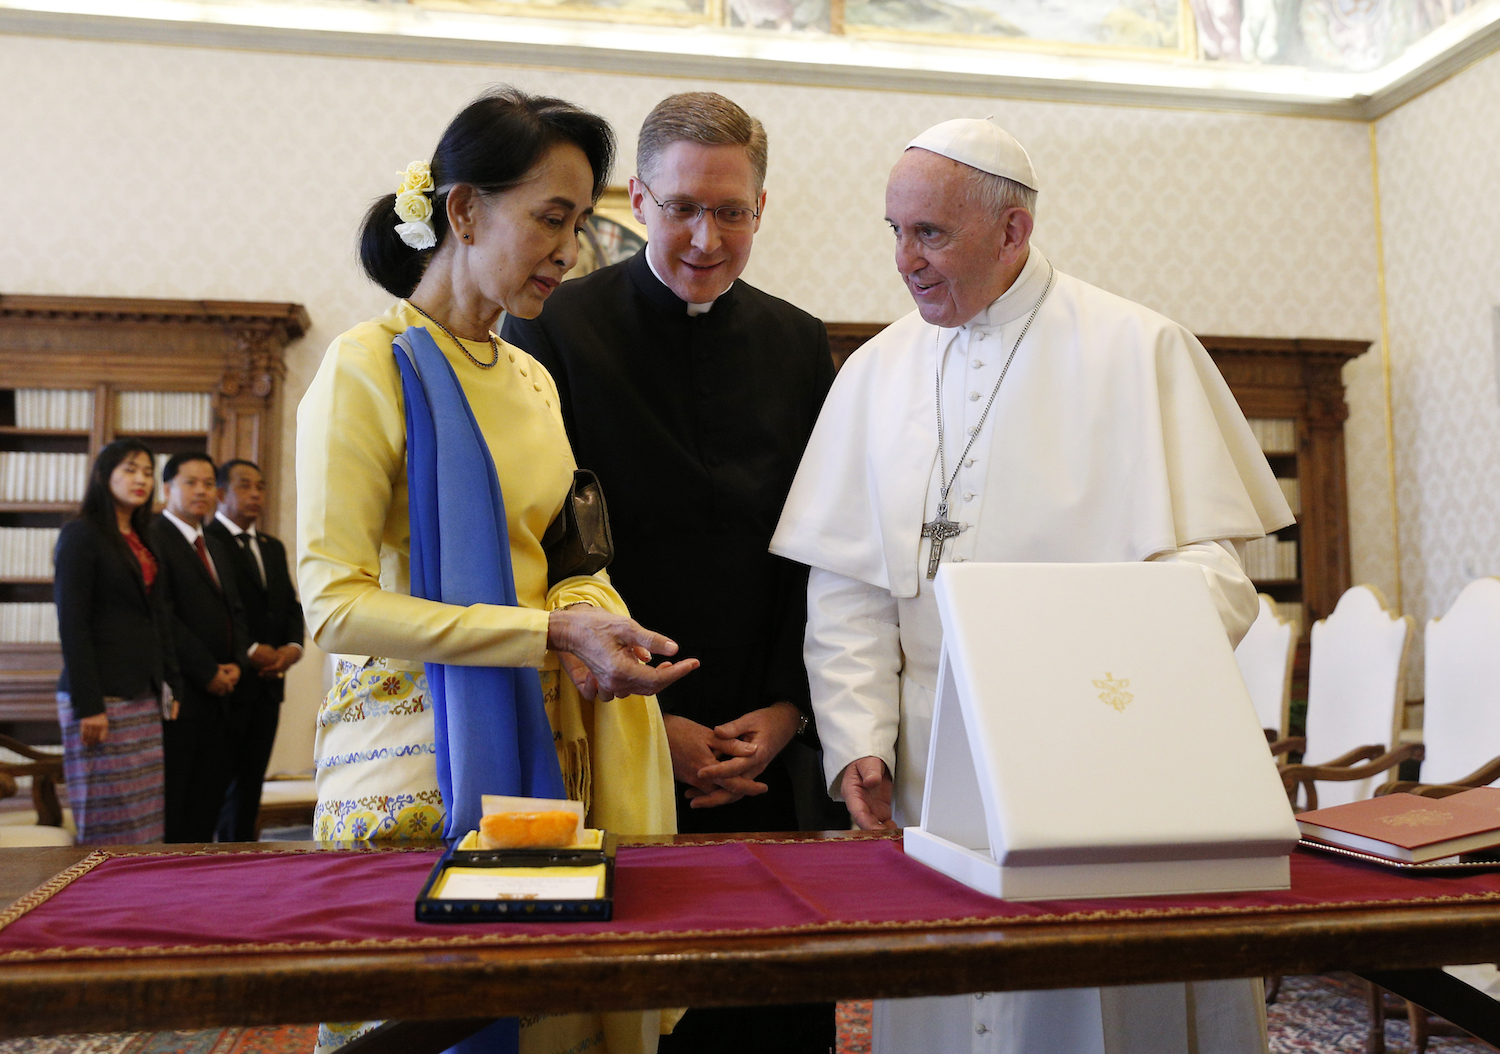 Pope Francis greets Aung San Suu Kyi, leader of Myanmar, during a private audience at the Vatican May 4. (CNS photo/Paul Haring)